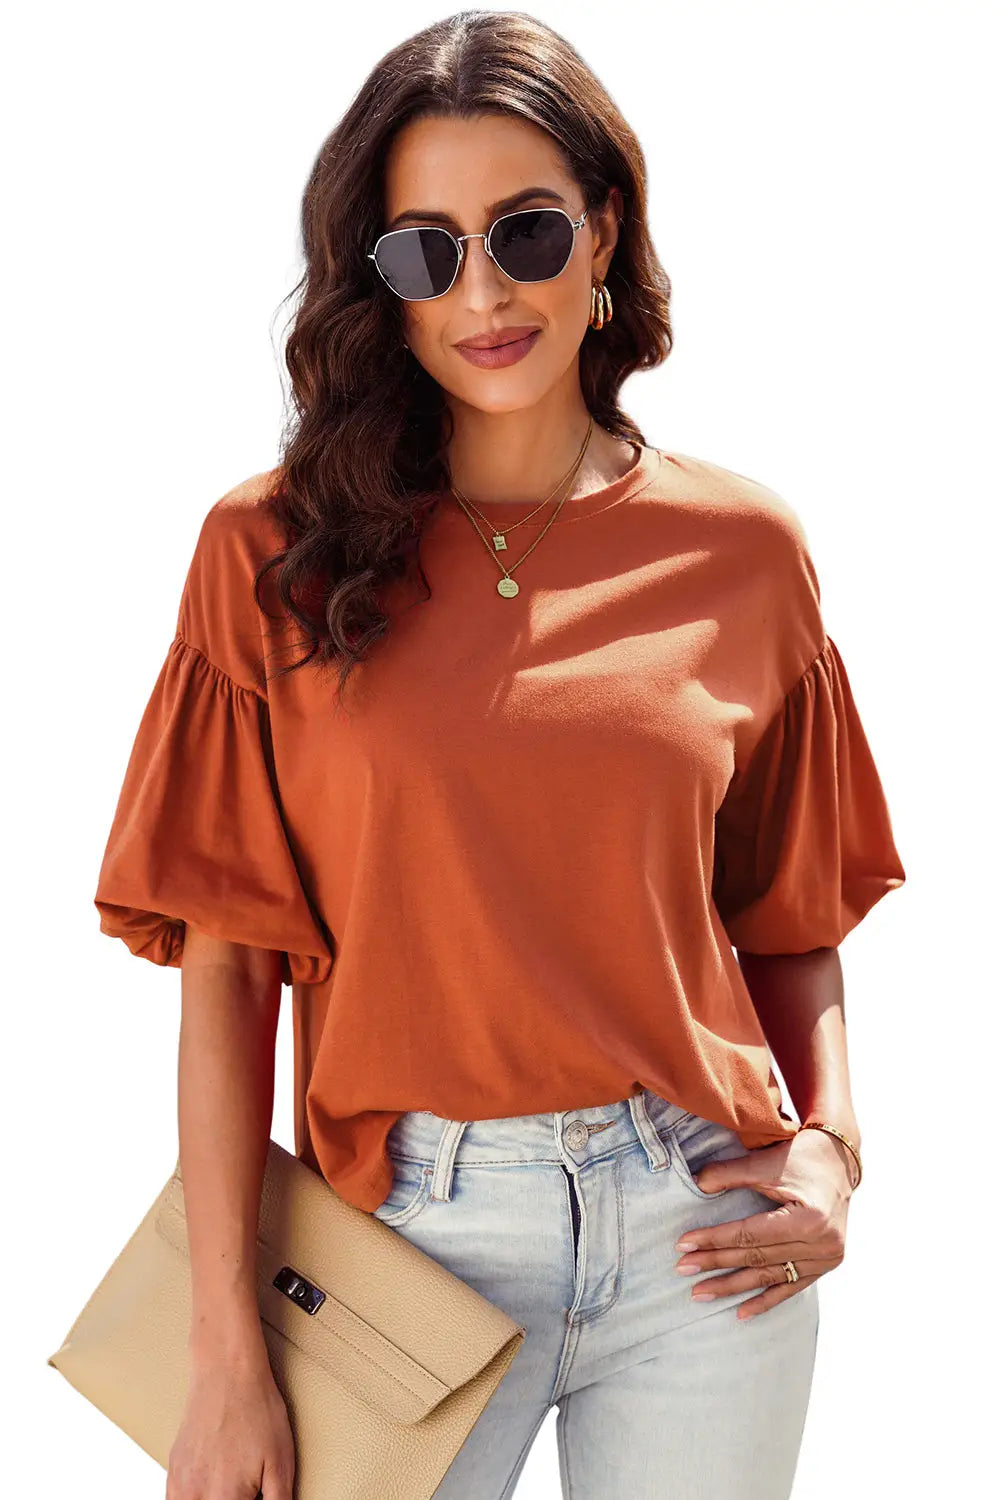 Black joint bubble sleeve round neck blouse - tops